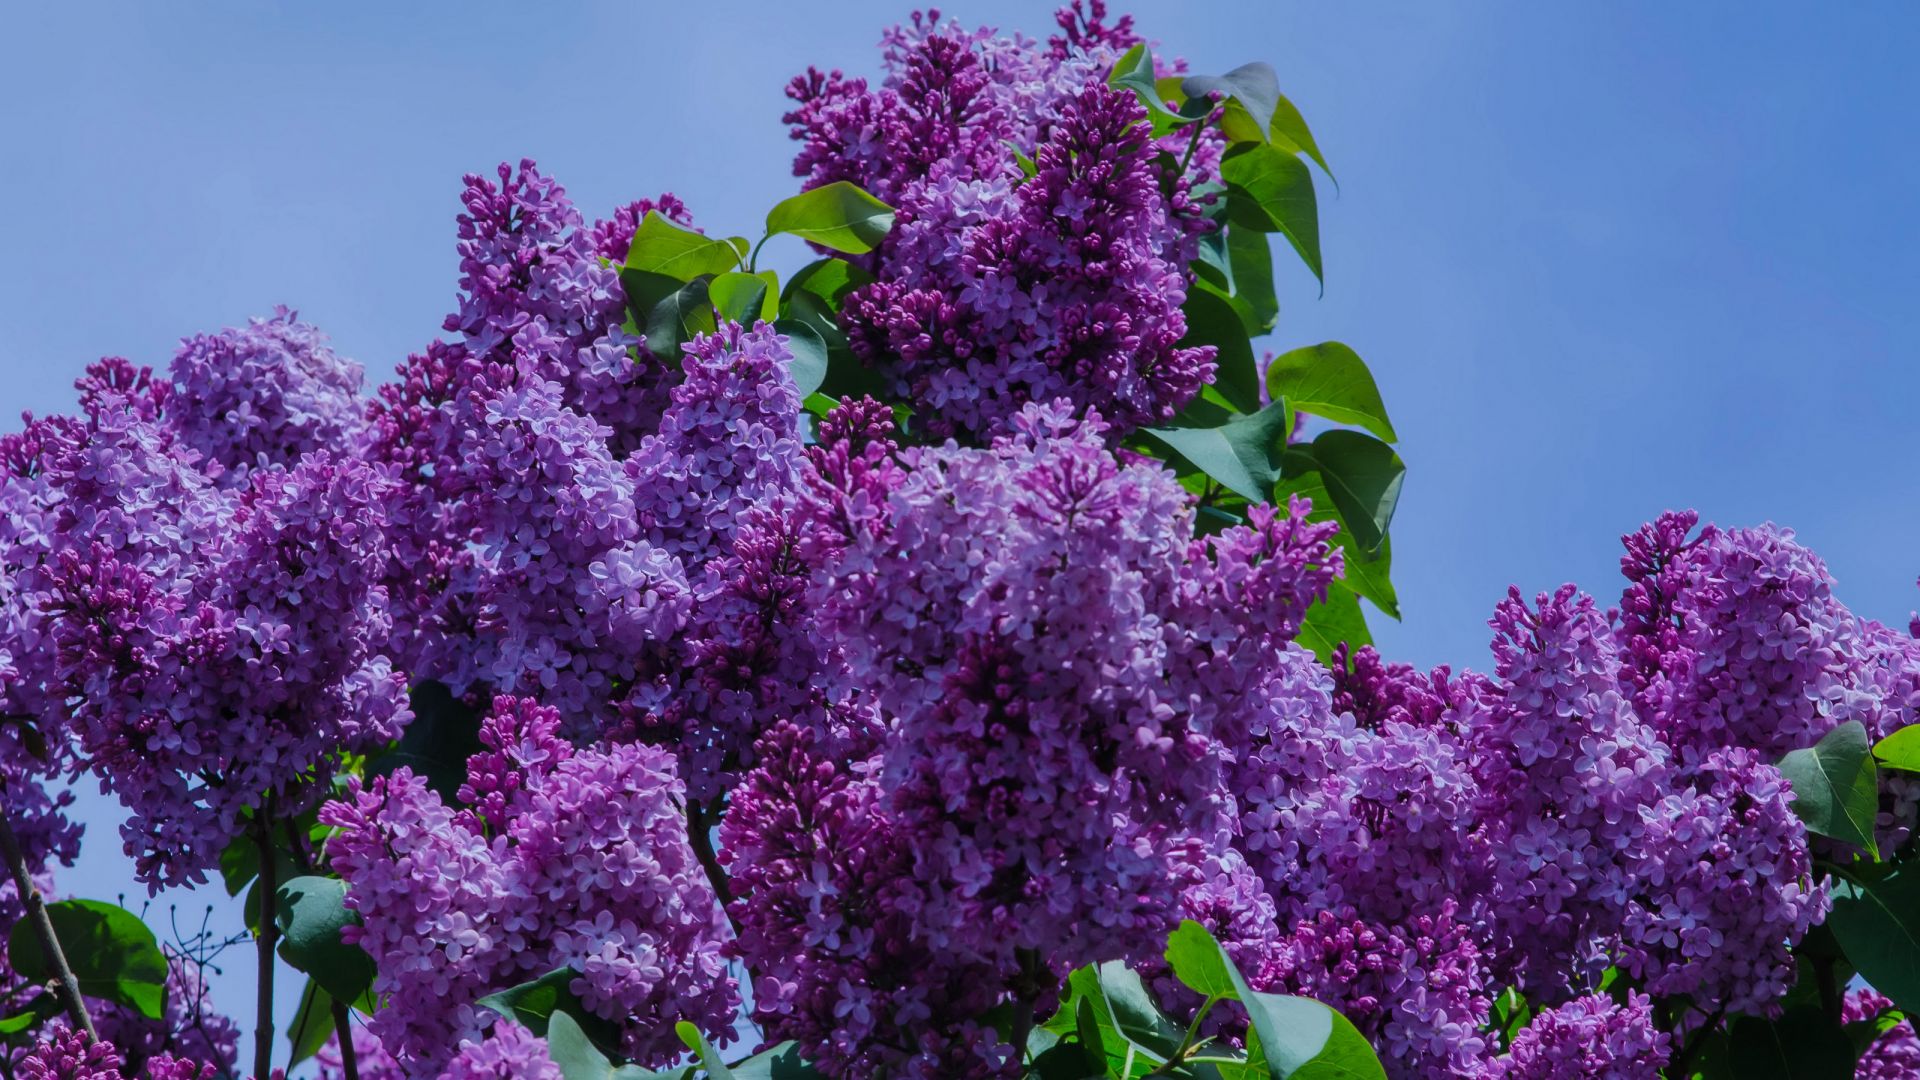 Lilacs in the bowl wallpaper  Flower wallpapers  52993